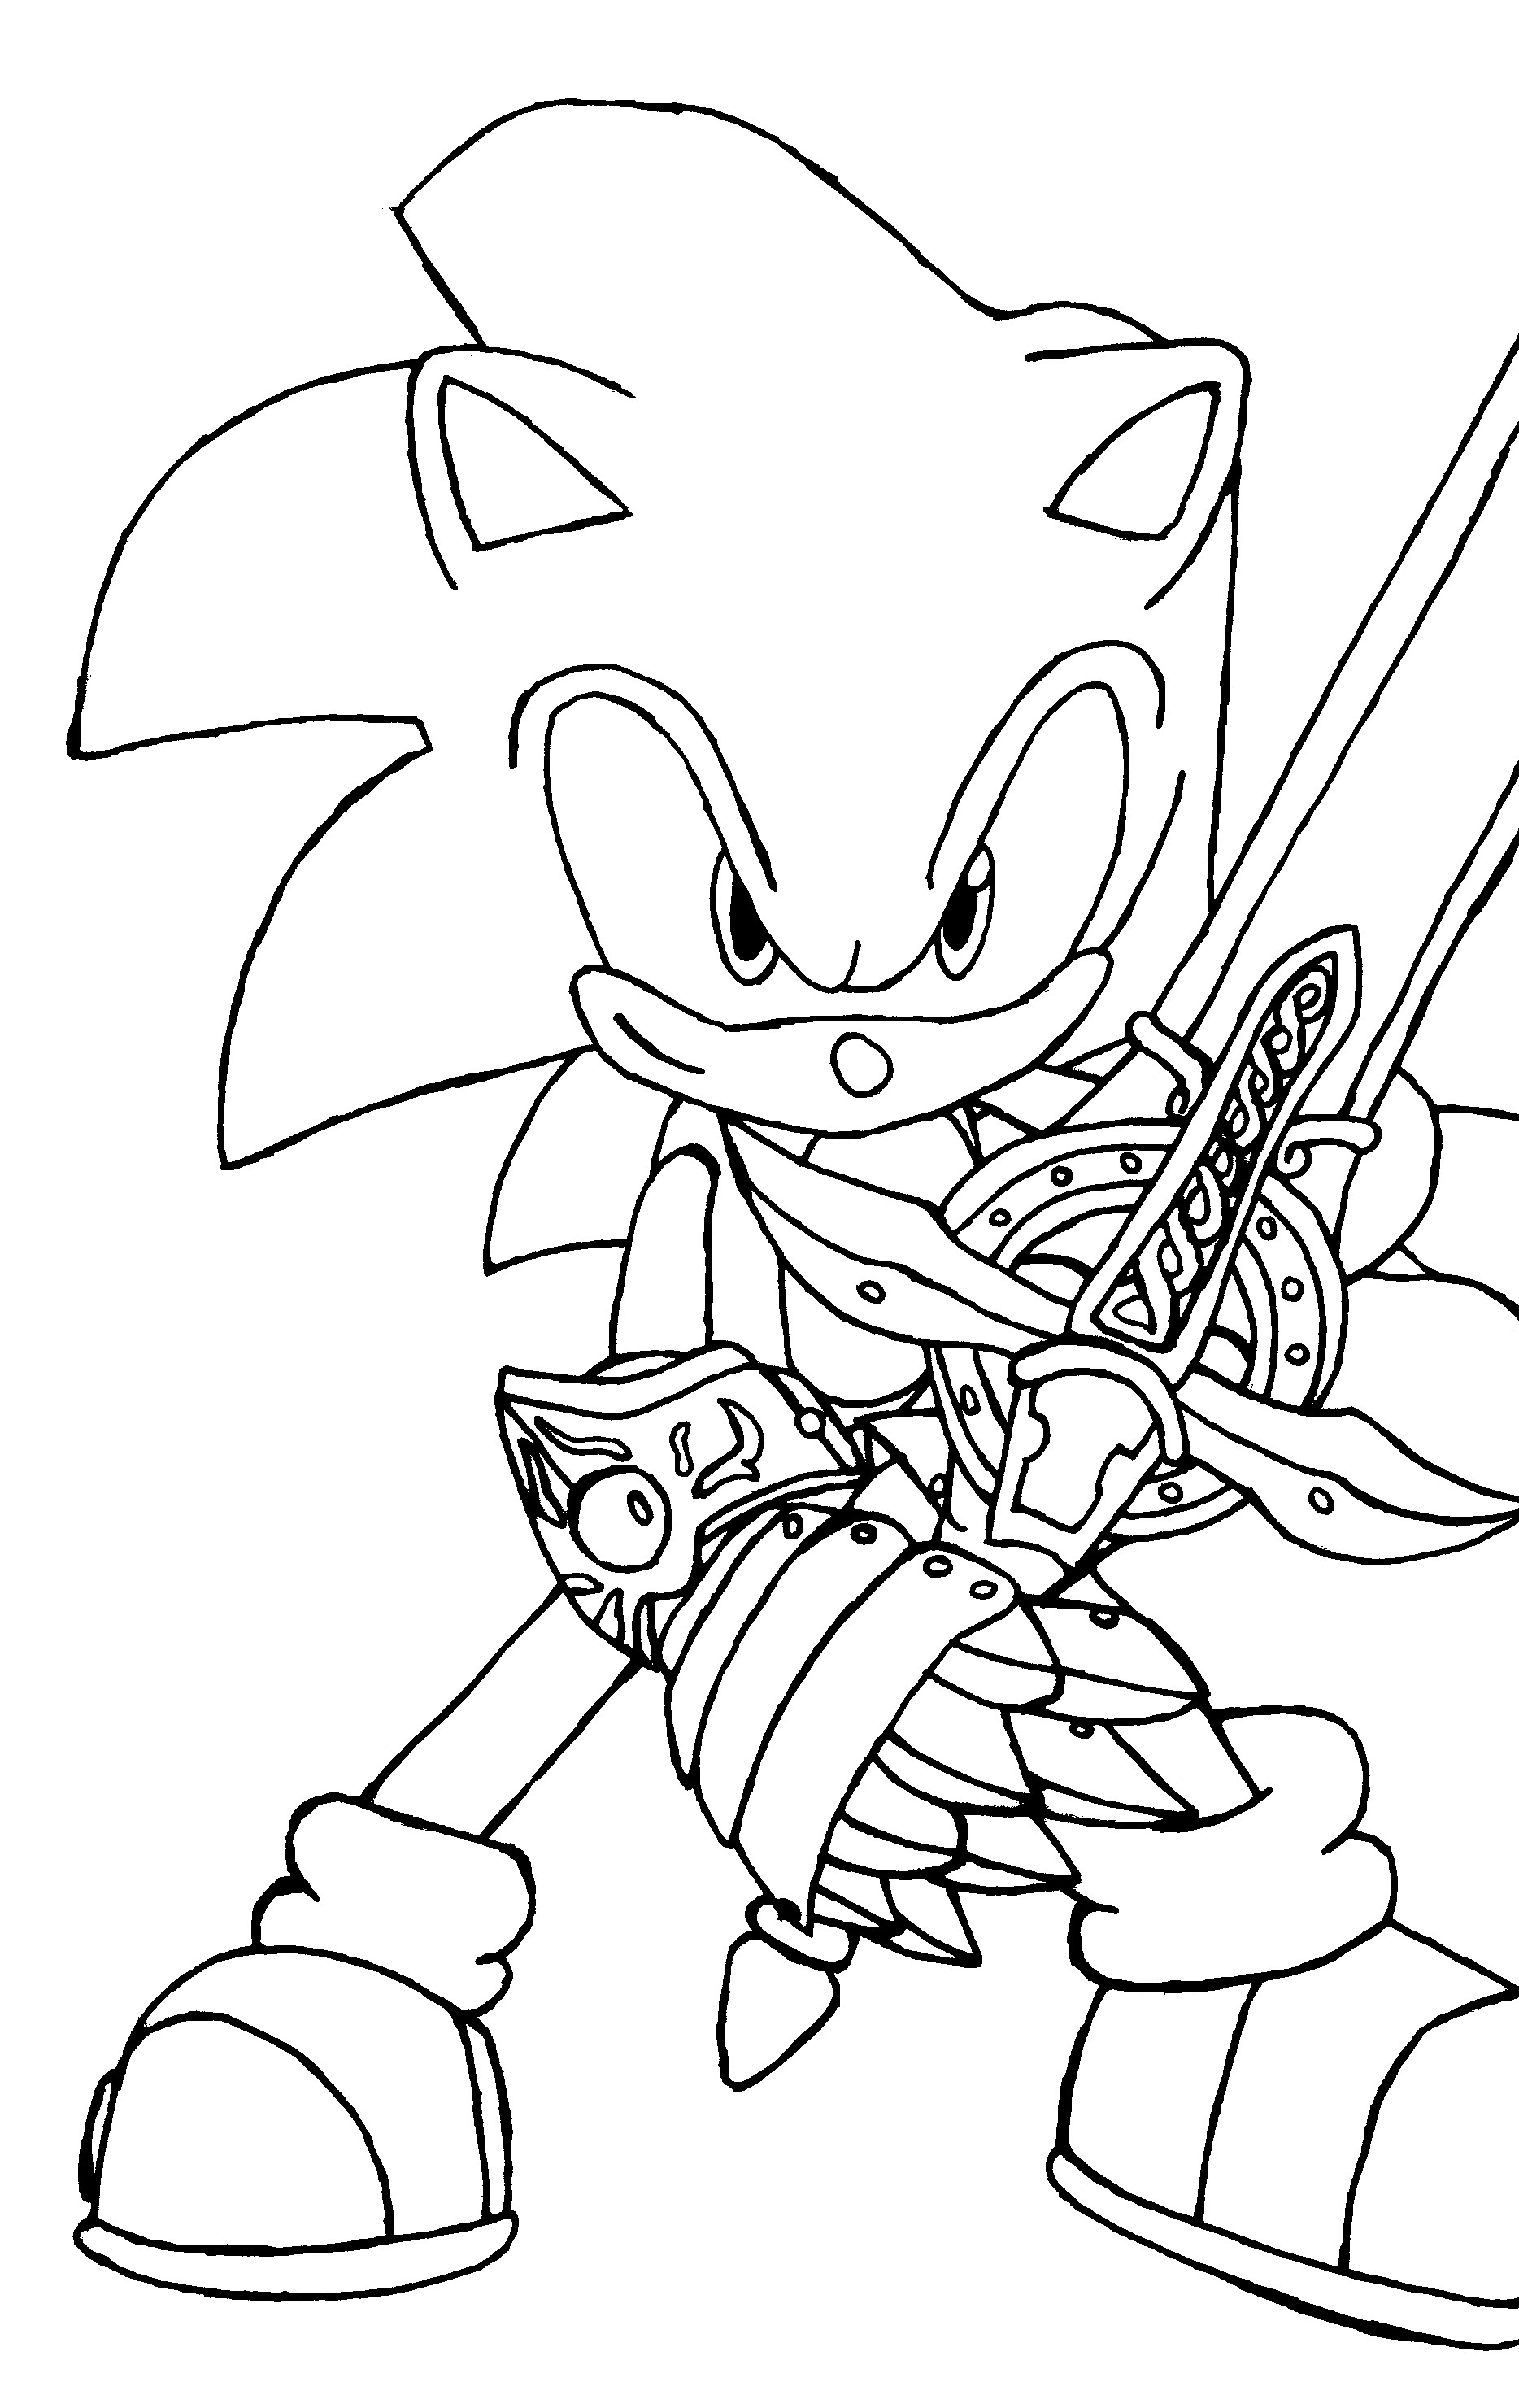 Super sonic coloring pages to download and print for free